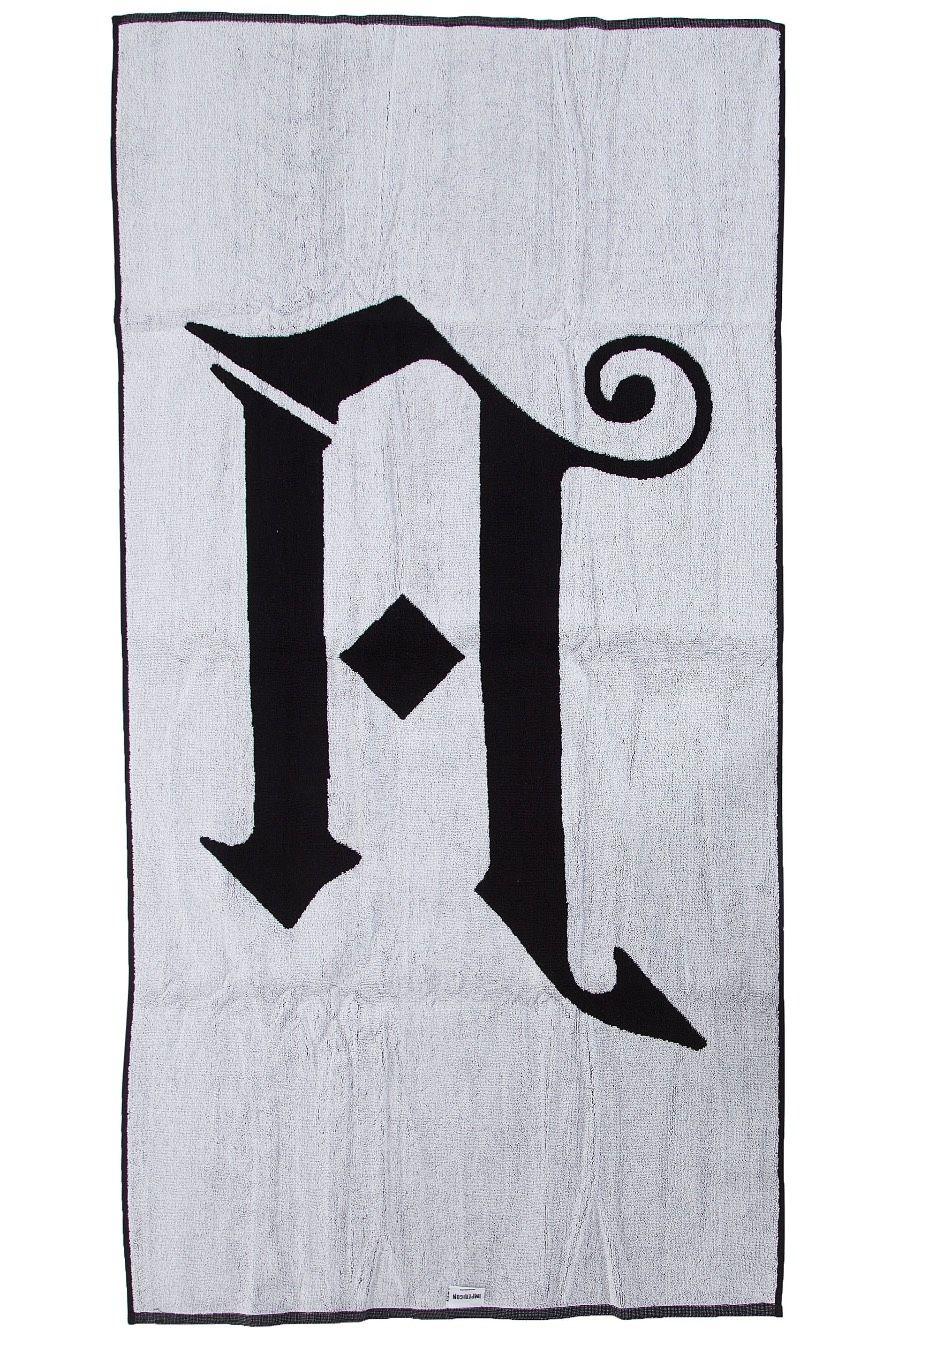 Architects Logo - Architects - A Logo - Towel - Official Melodic Hardcore Merchandise ...